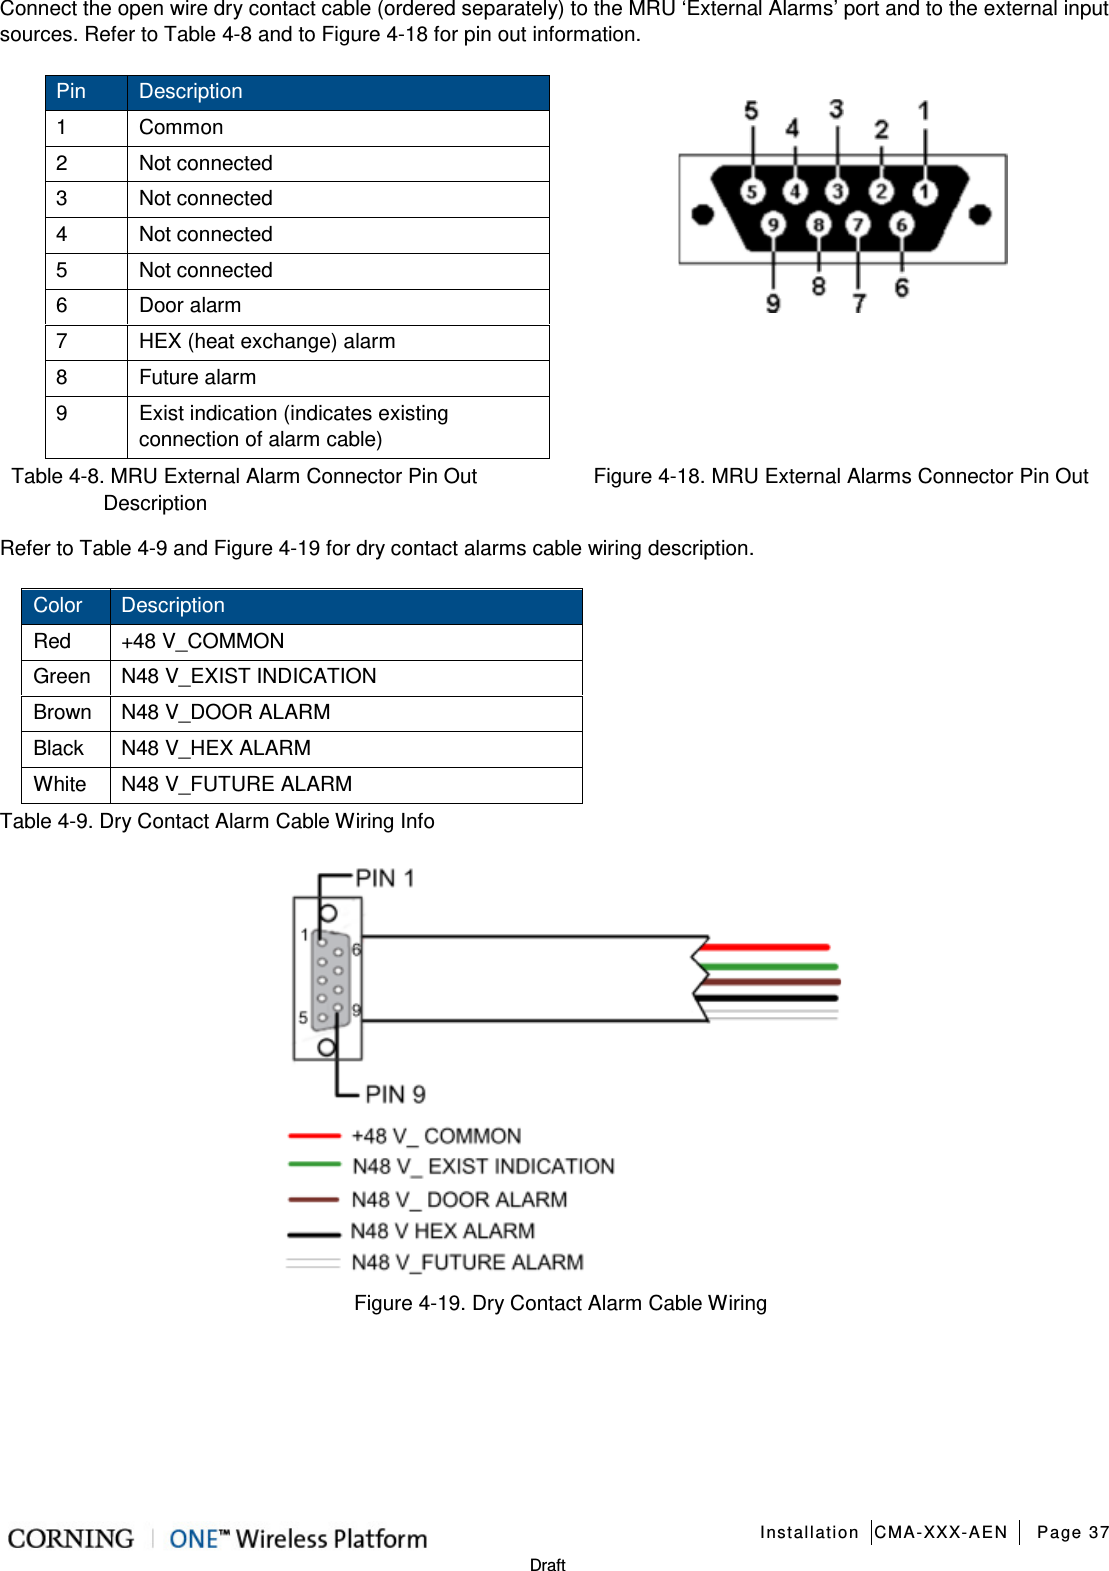   Installation CMA-XXX-AEN Page 37   Draft Connect the open wire dry contact cable (ordered separately) to the MRU ‘External Alarms’ port and to the external input sources. Refer to Table  4-8 and to Figure  4-18 for pin out information. Pin Description 1  Common 2  Not connected 3  Not connected 4  Not connected 5  Not connected 6  Door alarm 7  HEX (heat exchange) alarm 8  Future alarm 9  Exist indication (indicates existing connection of alarm cable)   Table  4-8. MRU External Alarm Connector Pin Out Description Figure  4-18. MRU External Alarms Connector Pin Out Refer to Table  4-9 and Figure  4-19 for dry contact alarms cable wiring description. Color Description Red +48 V_COMMON Green N48 V_EXIST INDICATION Brown N48 V_DOOR ALARM Black N48 V_HEX ALARM White N48 V_FUTURE ALARM Table  4-9. Dry Contact Alarm Cable Wiring Info  Figure  4-19. Dry Contact Alarm Cable Wiring    